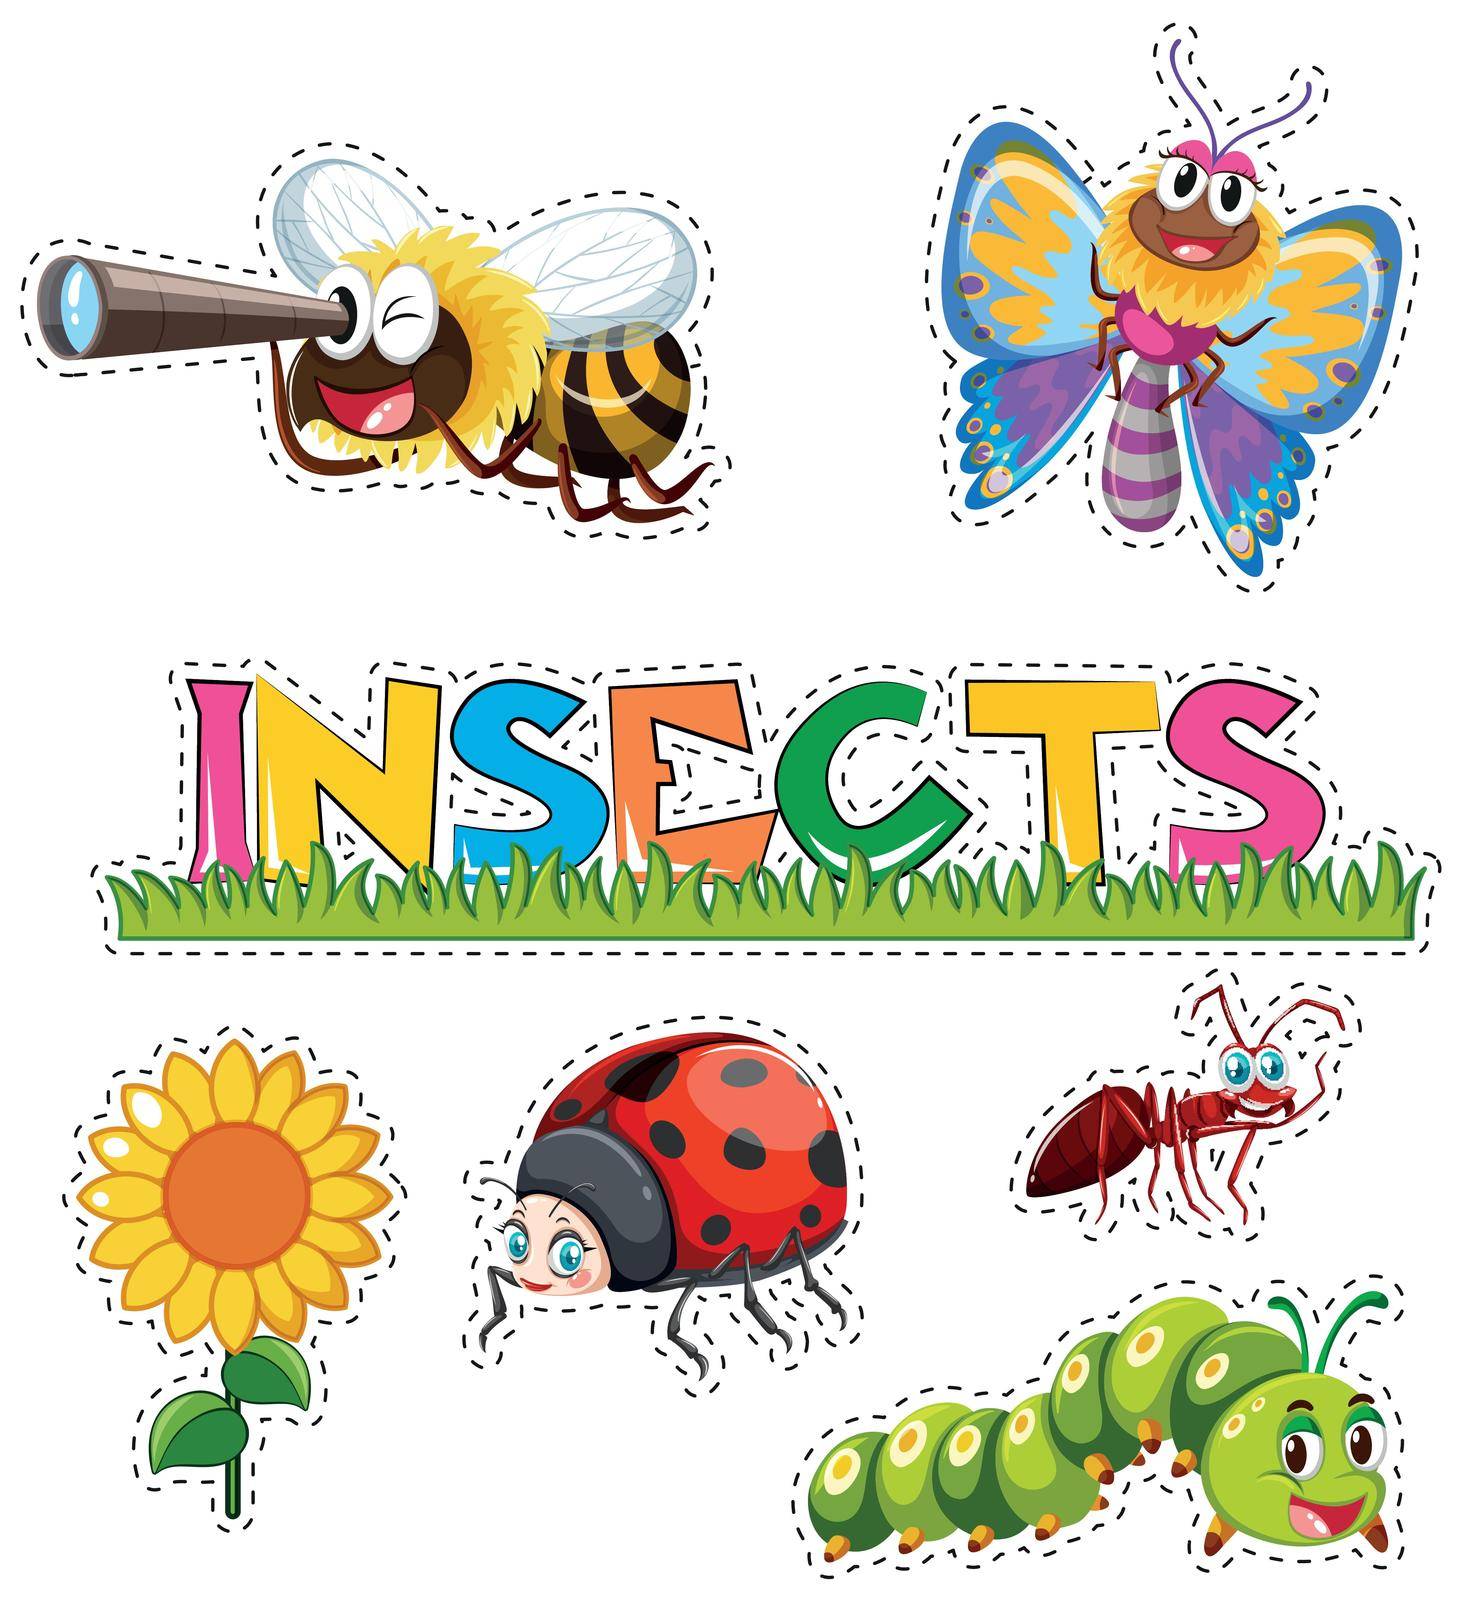 Many insects in sticker design by iimages